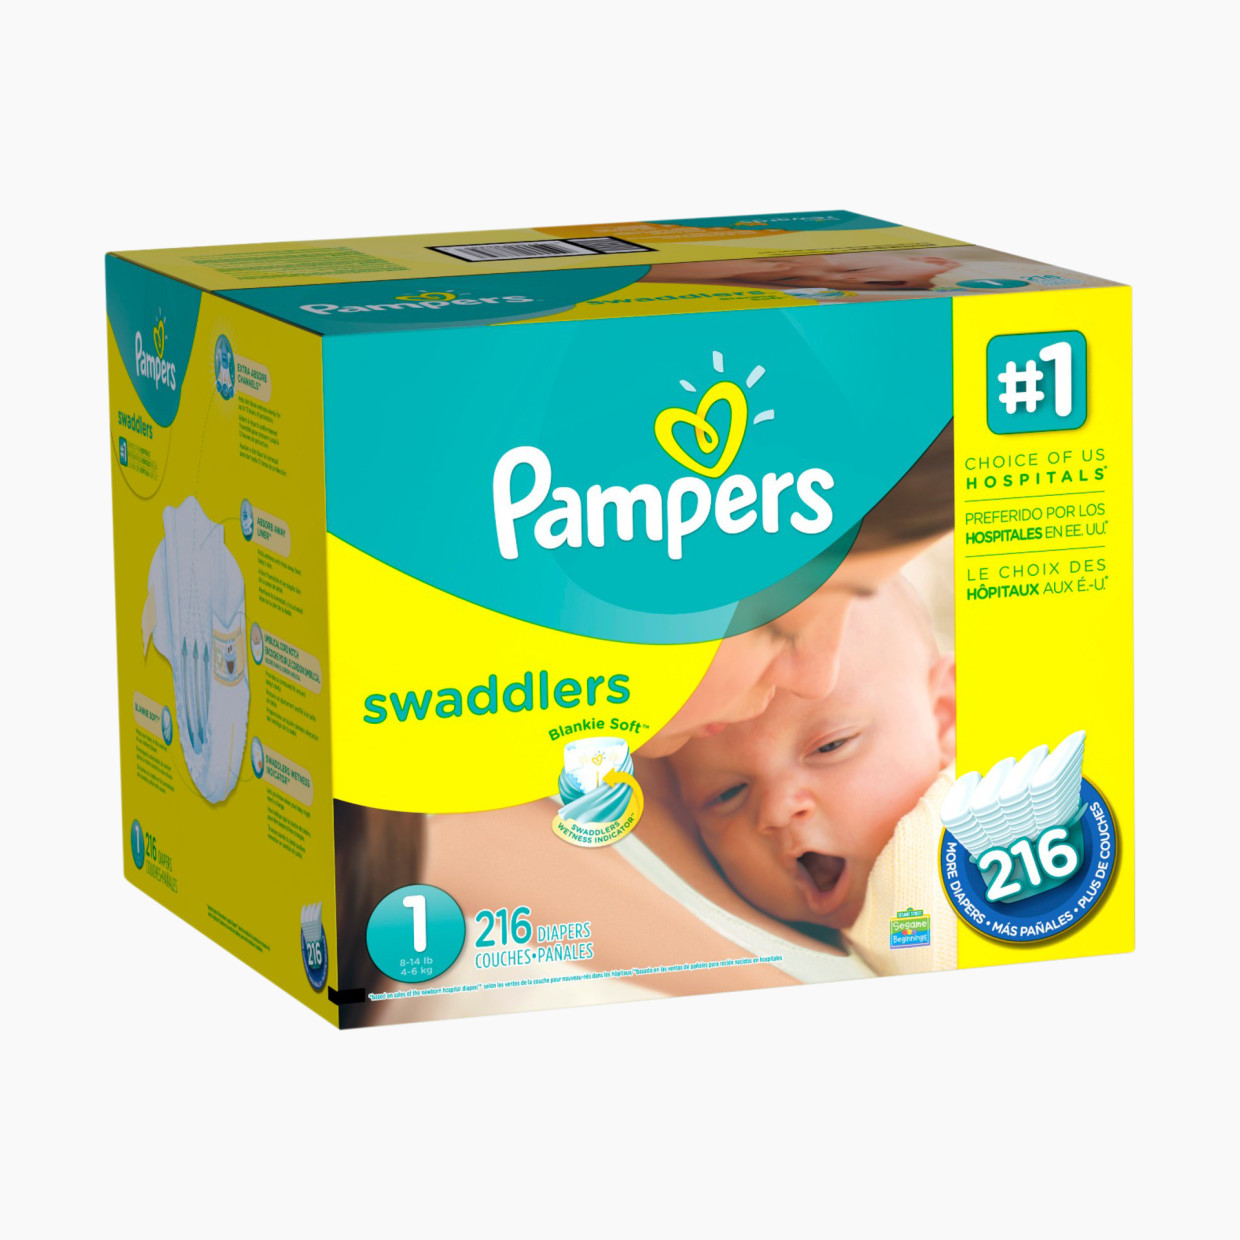 Pampers Swaddlers Diapers - 1 (216 Count).